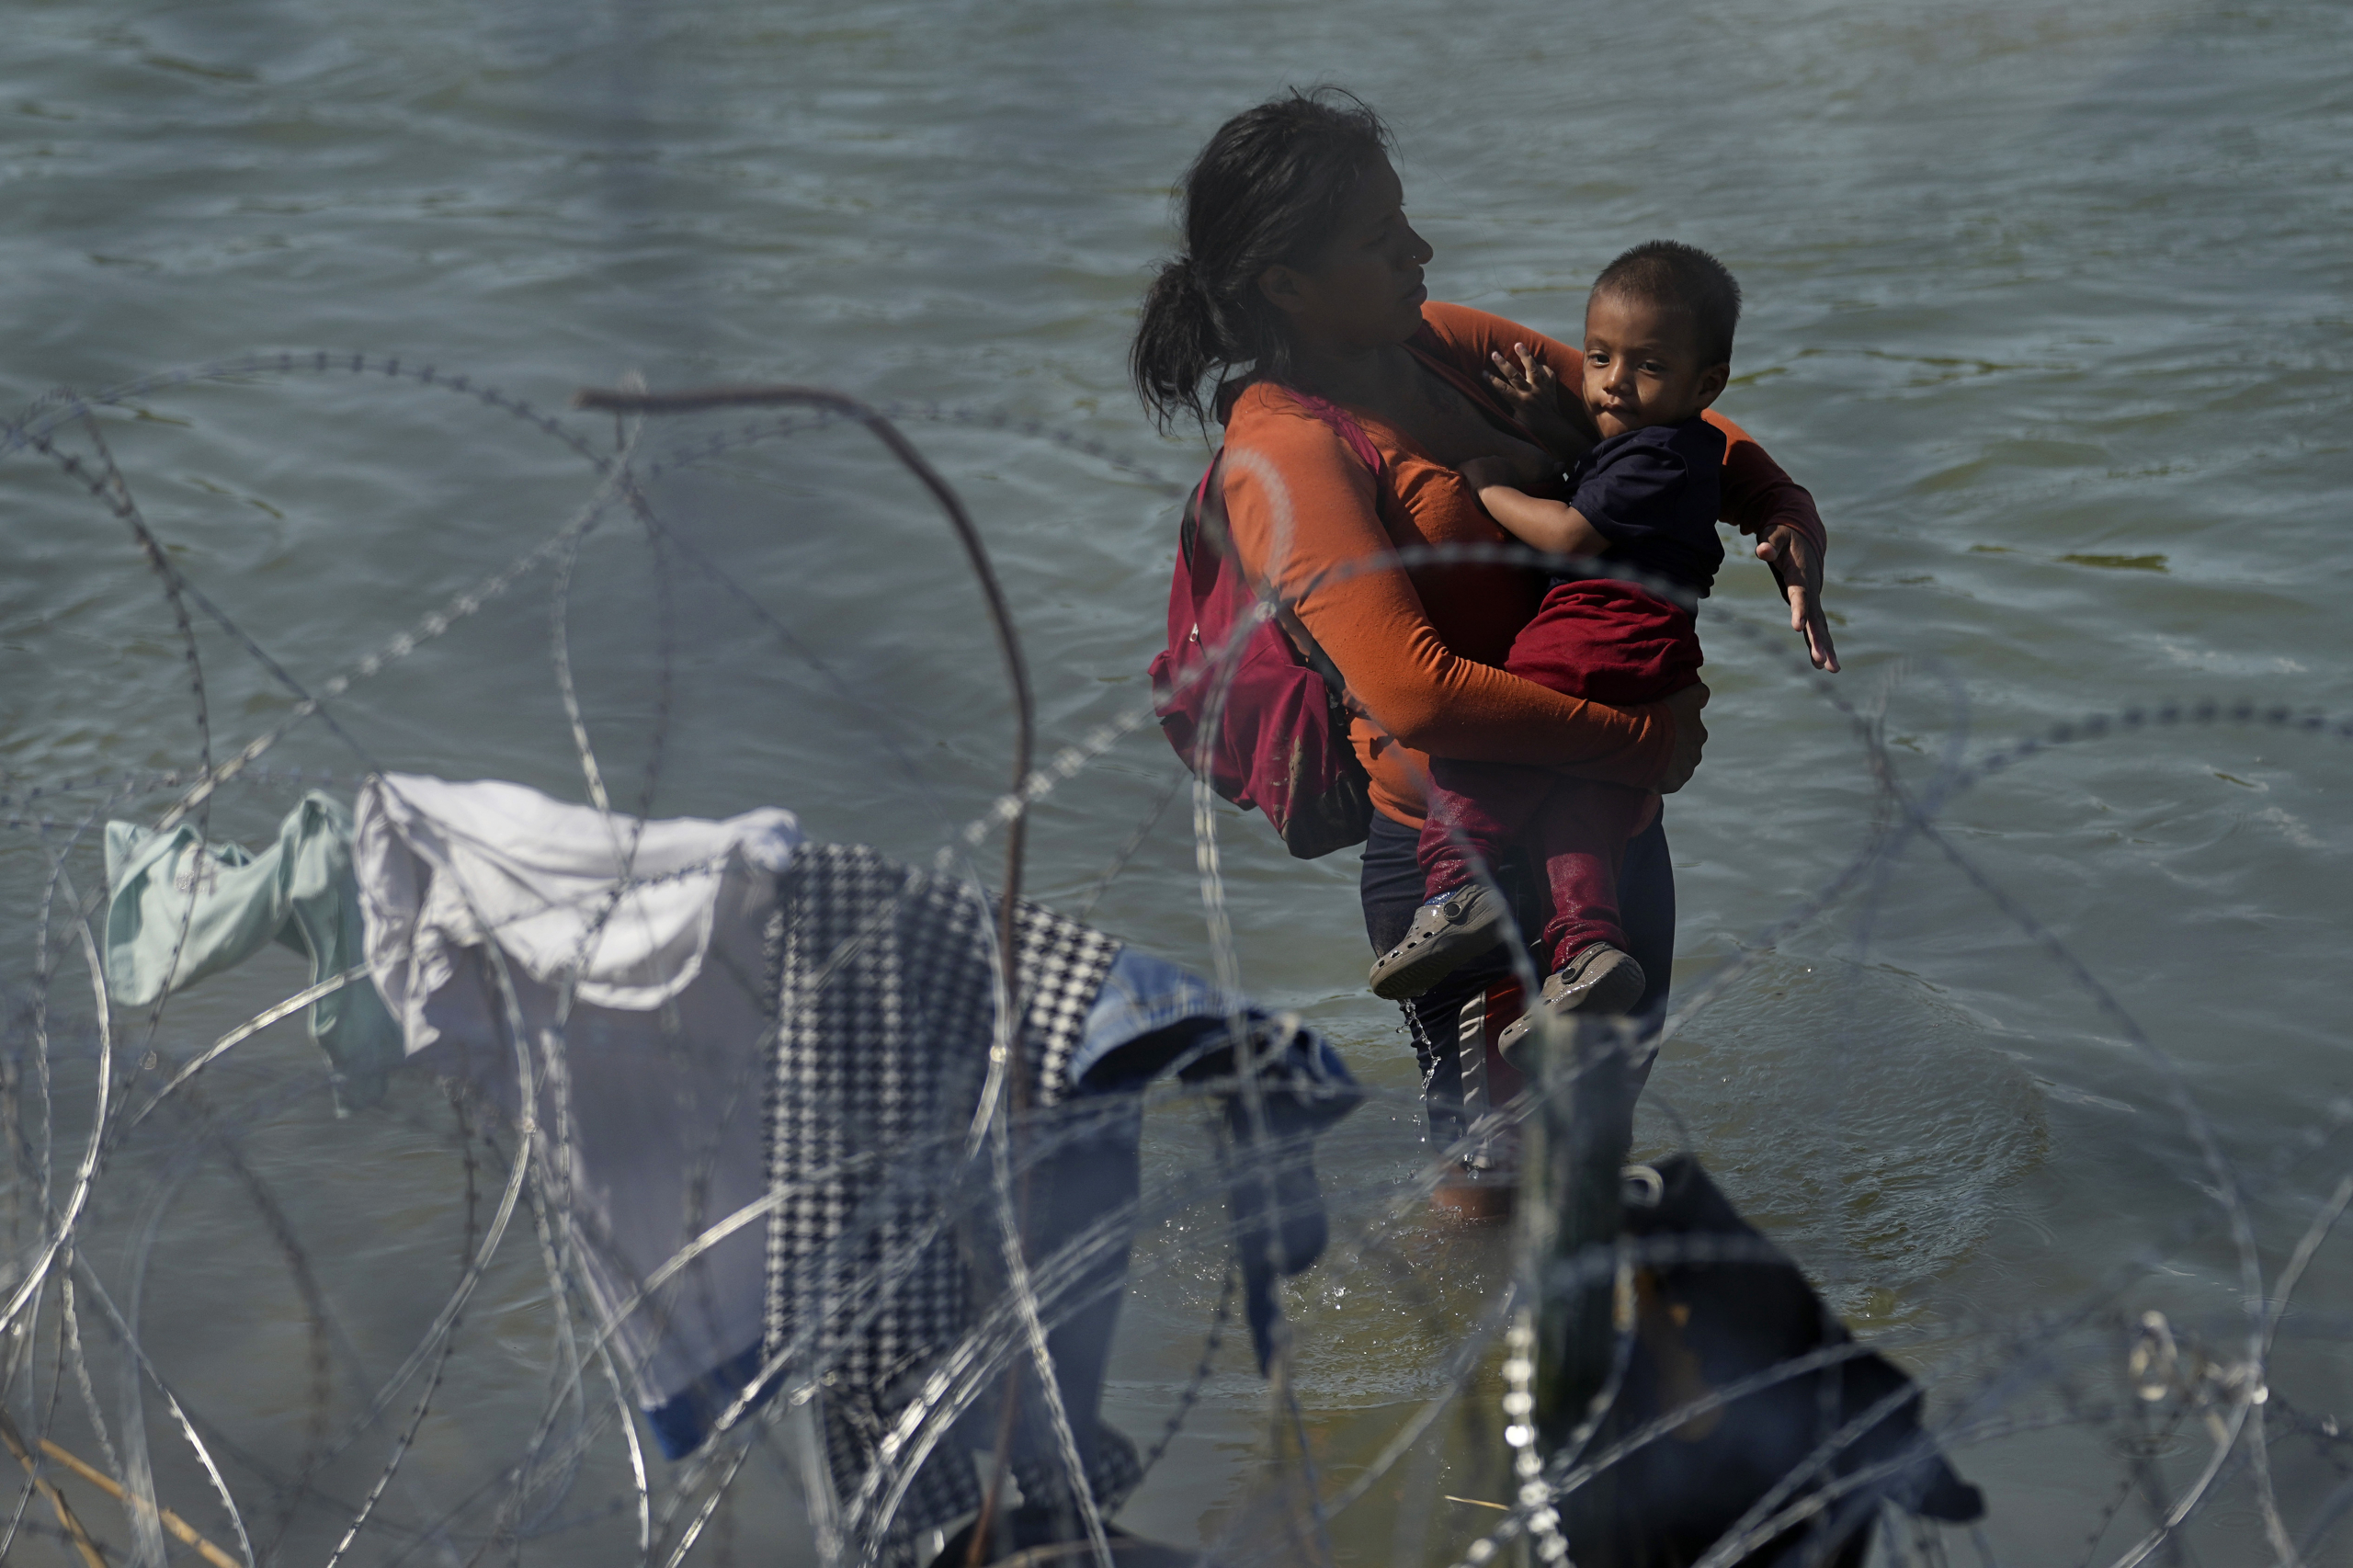 Migrants who crossed into the U.S. from Mexico are met with concertina wire along the Rio Grande, Thursday, Sept. 21, 2023, in Eagle Pass, Texas. (AP Photo/Eric Gay)